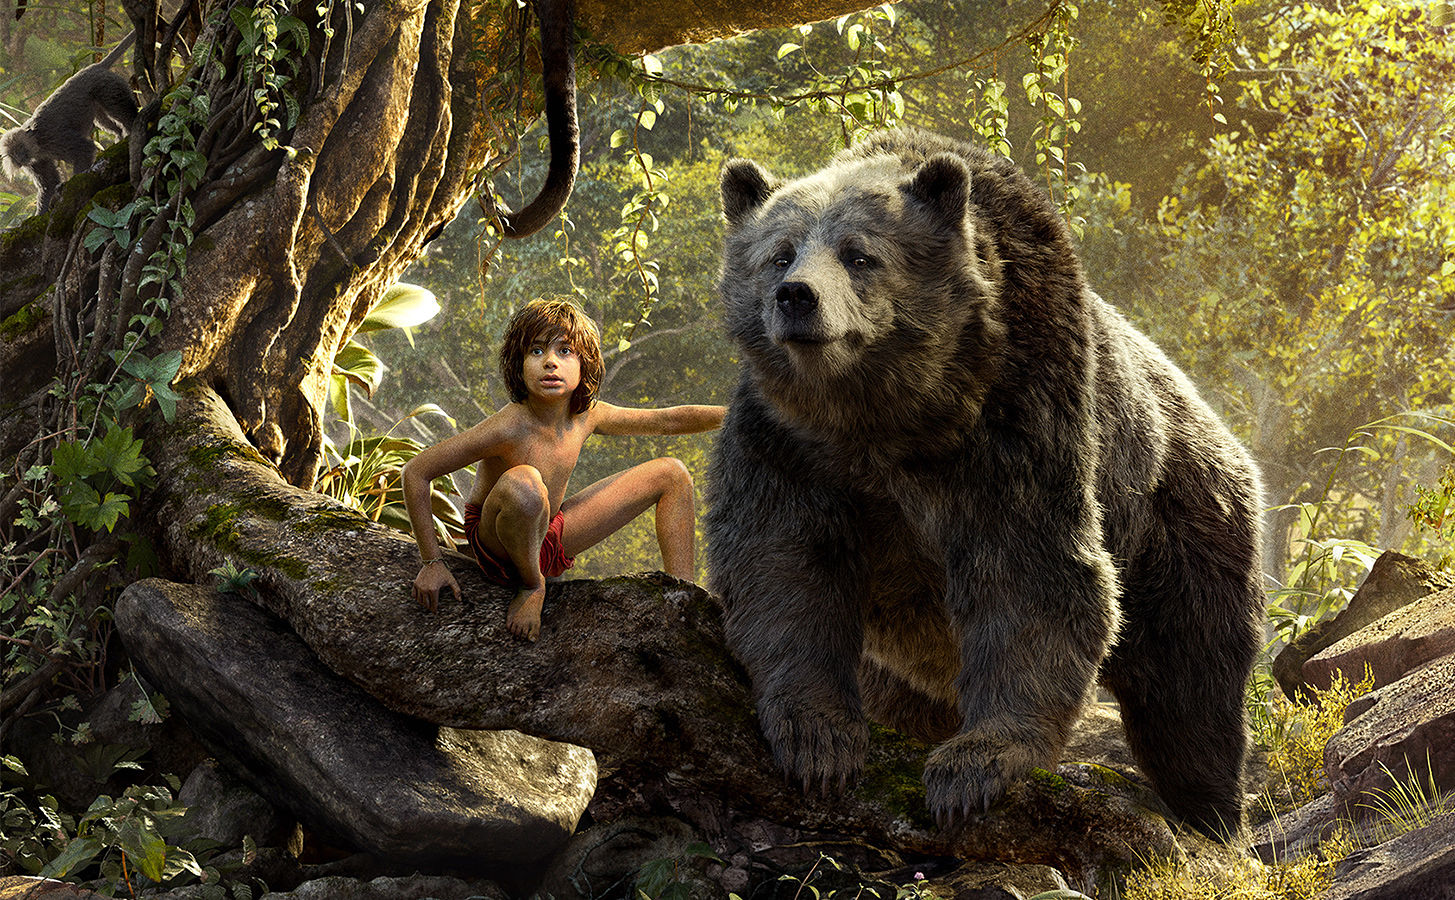 the-latest-poster-for-disney-s-the-jungle-book-finally-reveals-mowgli-bagheera-and-balo-781090